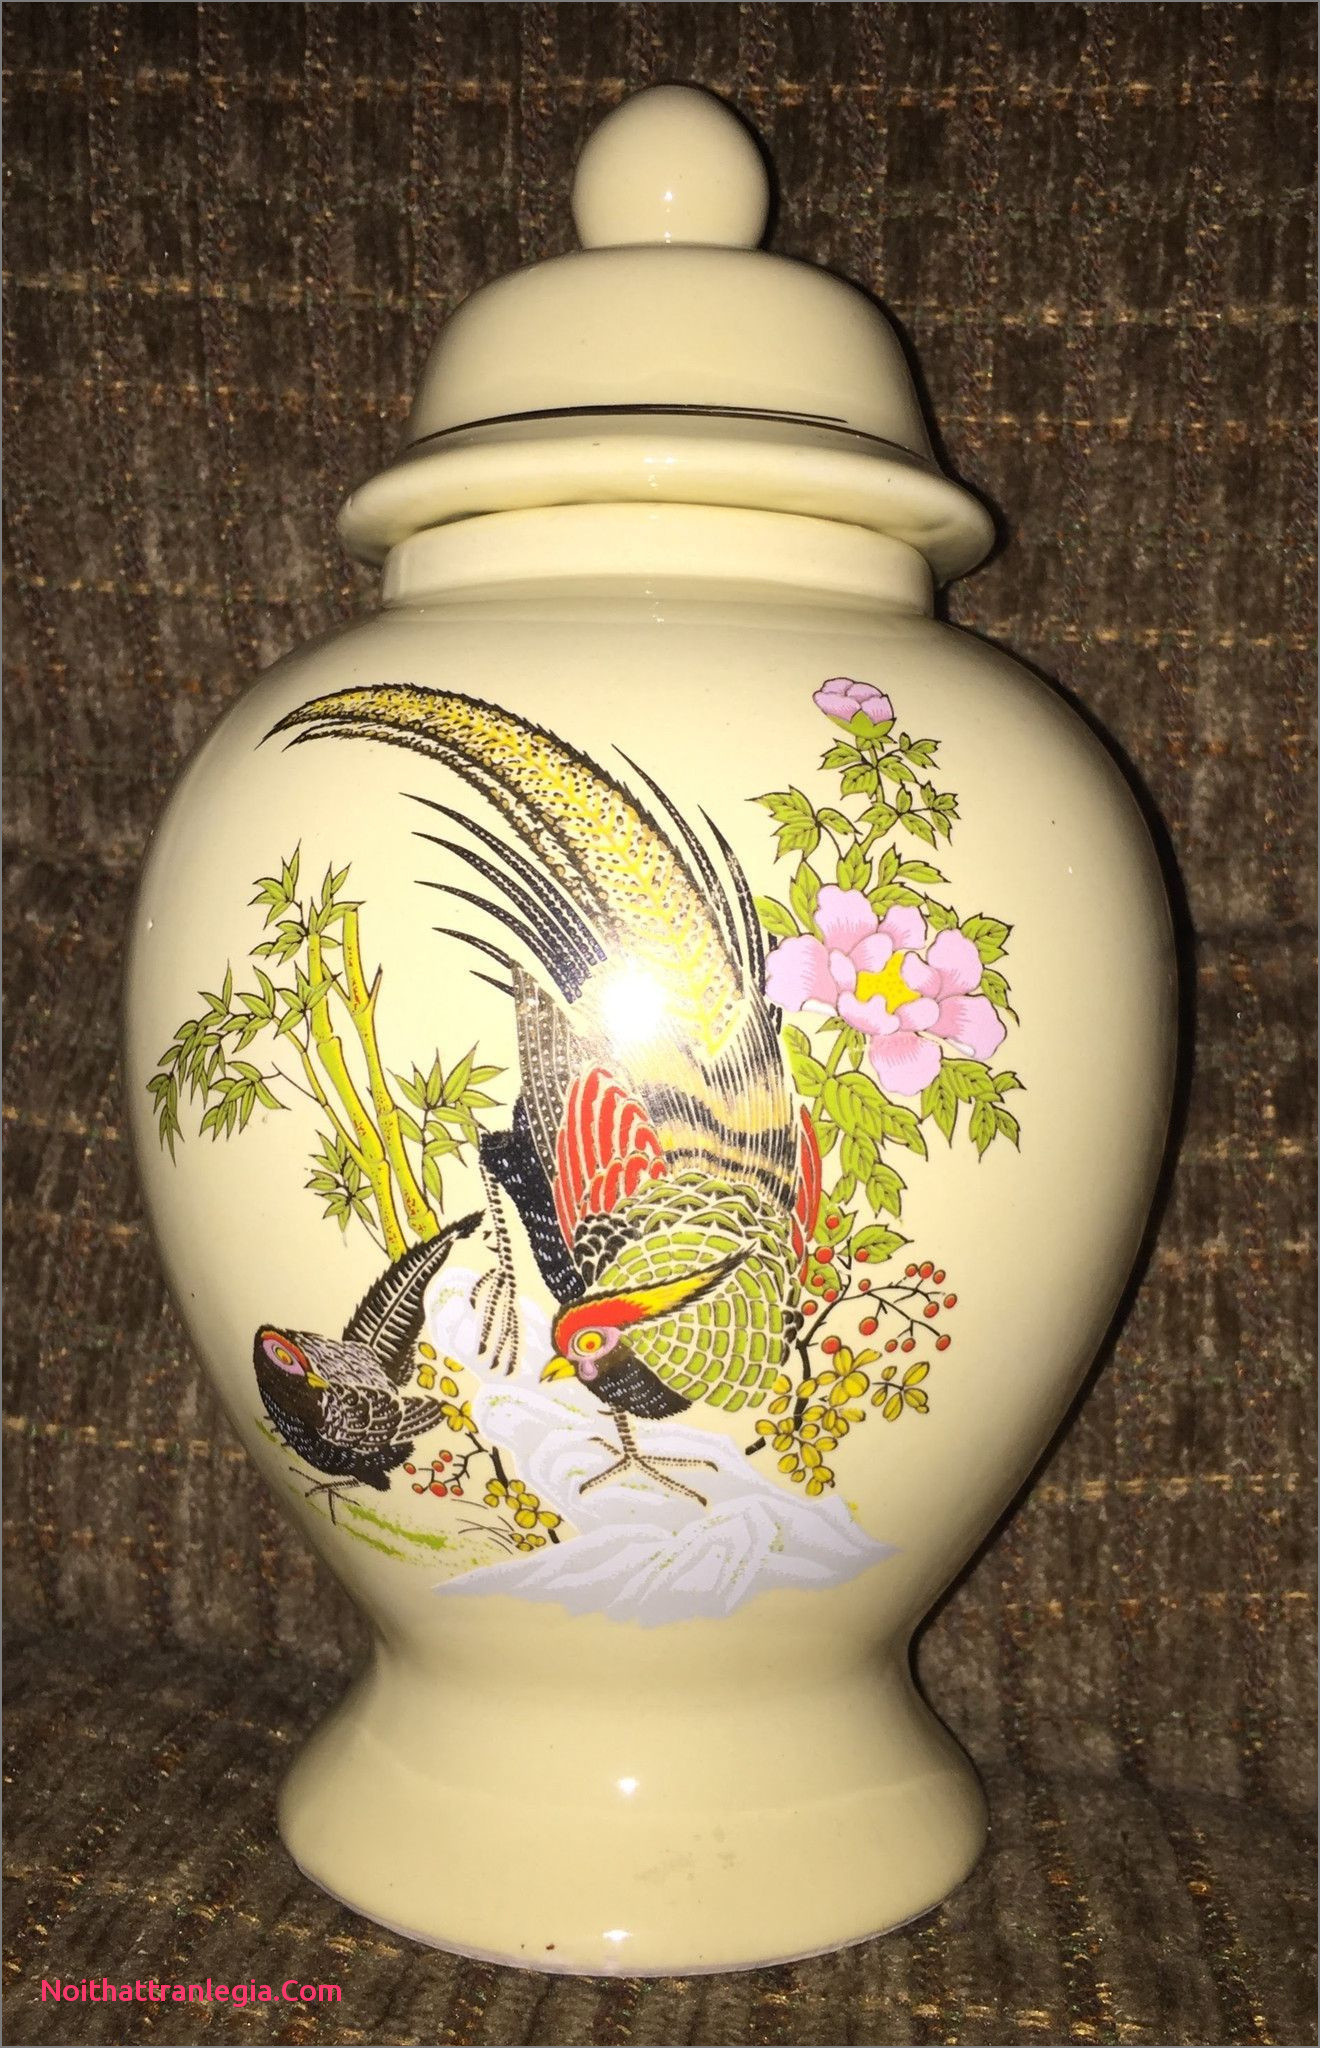 22 Fashionable Bamboo Vase 2022 free download bamboo vase of 20 chinese antique vase noithattranlegia vases design within vintage collectible asian vase jar hand painted two birds bamboo and flowers